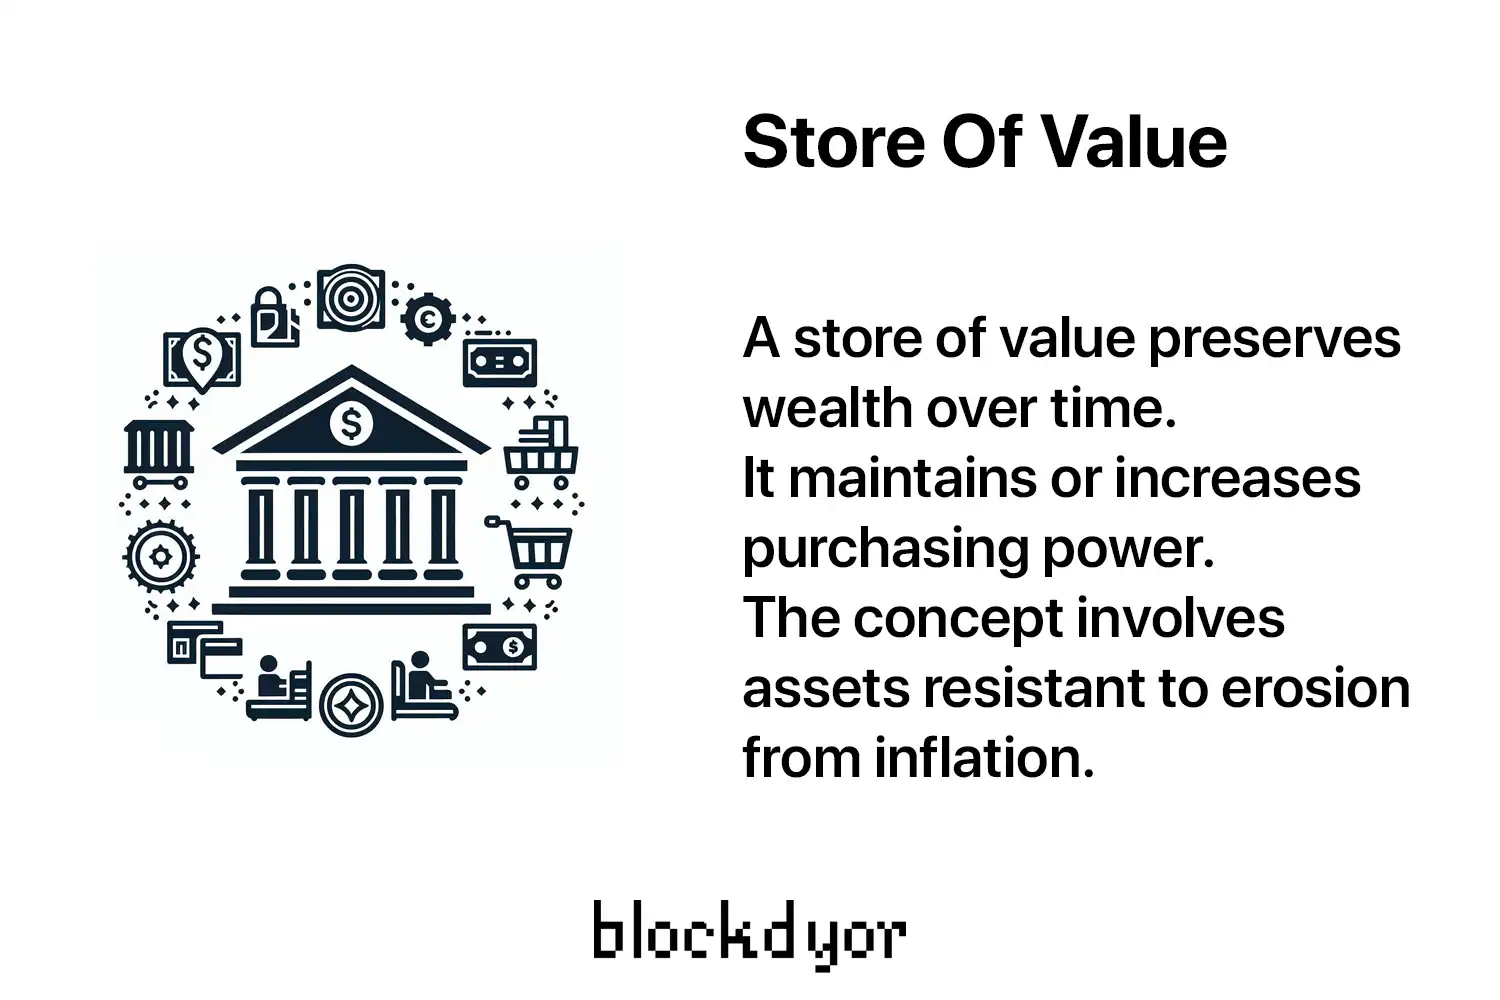 Store Of Value: What Does It Mean?